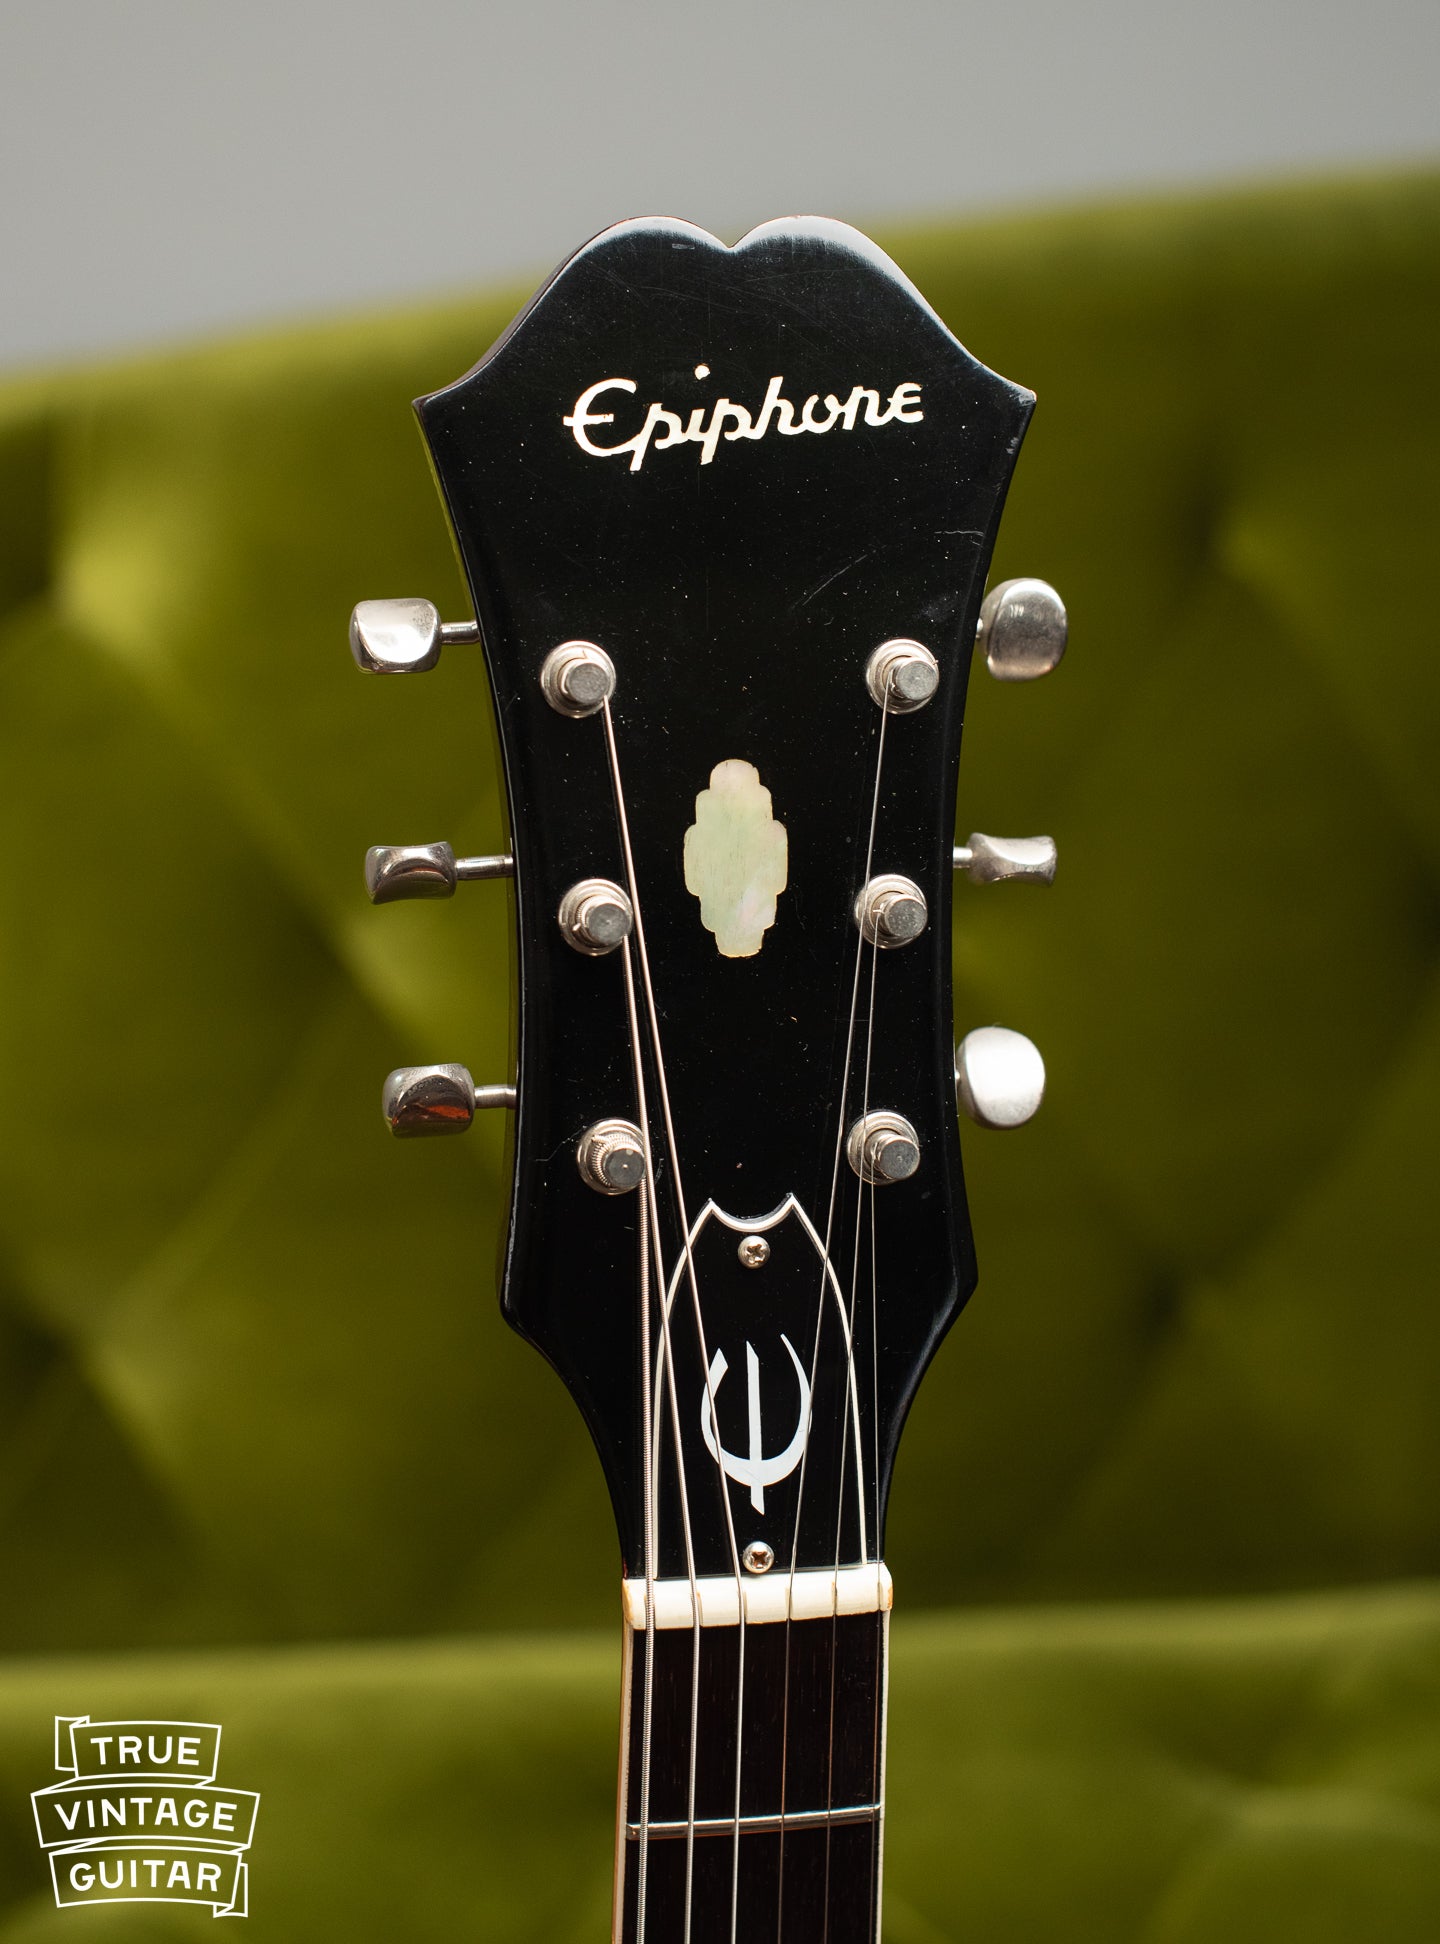 Headstock, pearl Epiphone inlay, Vintage 1967 Epiphone E360T Riviera